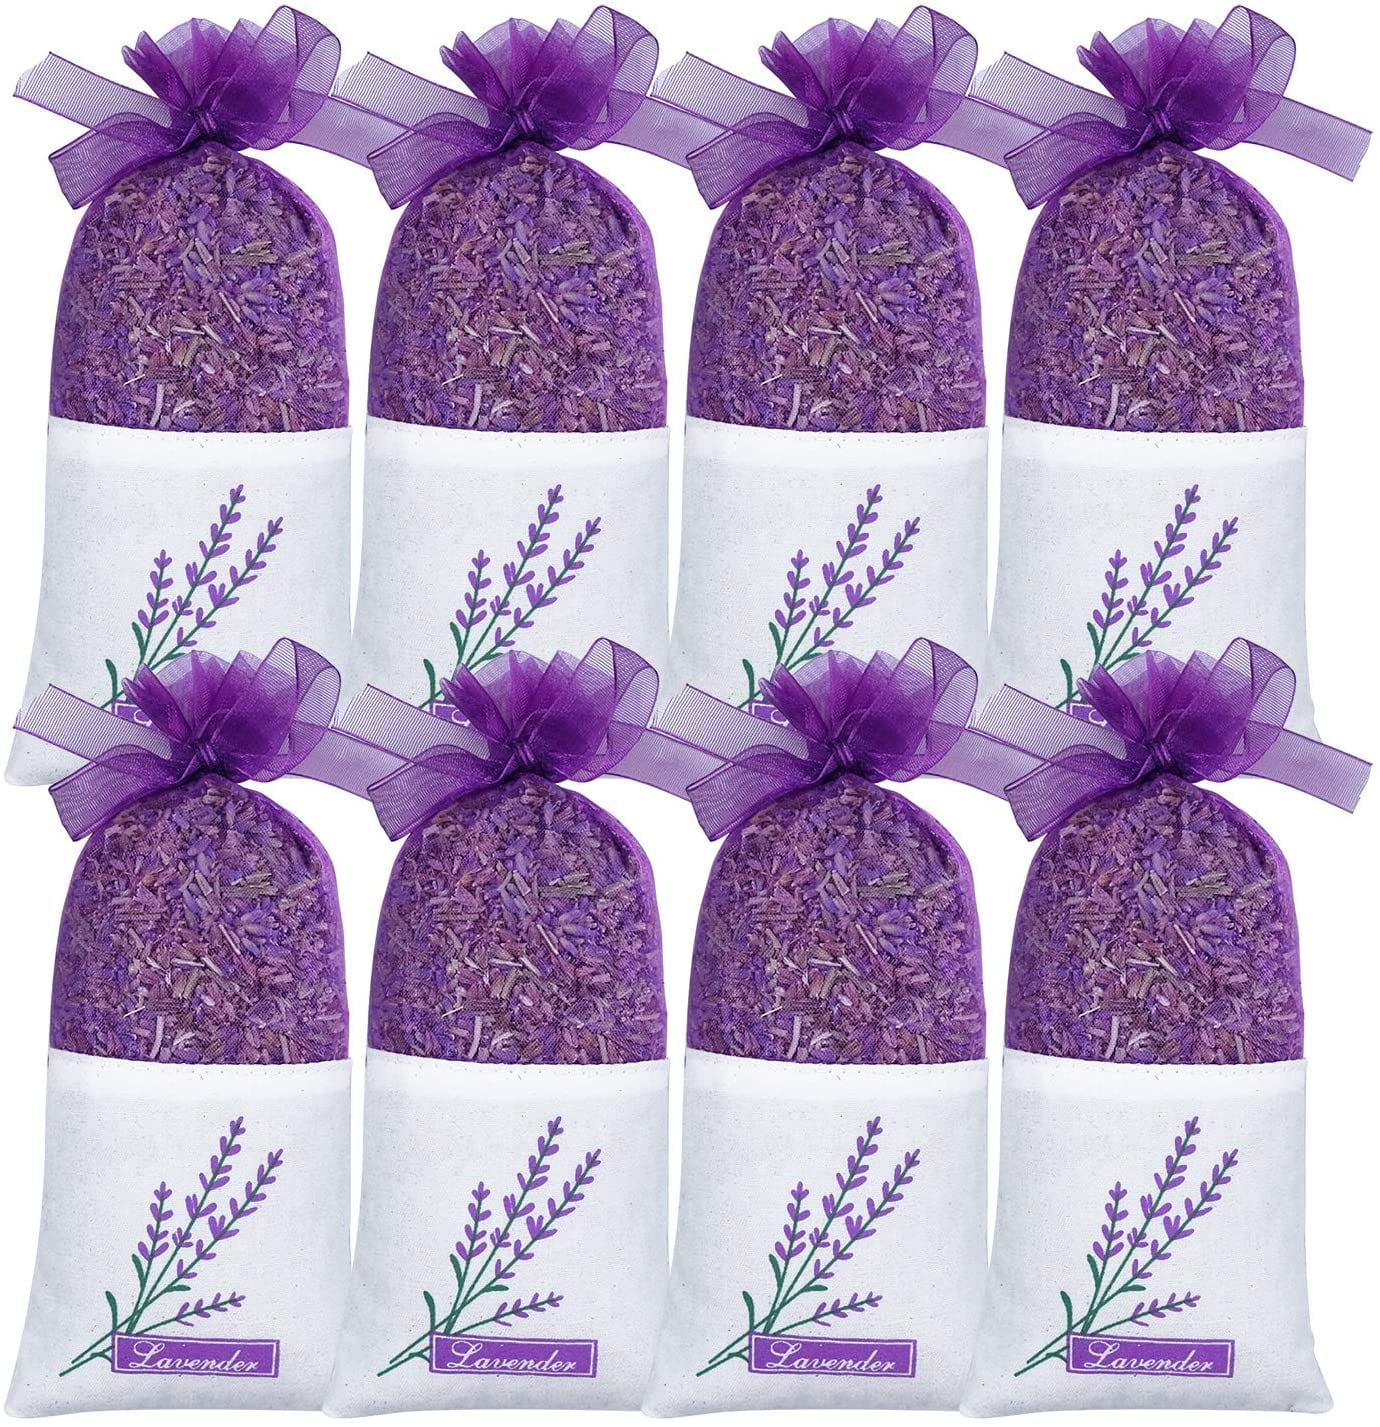 Set of 4 Lavender Sachets made with Rose Organza Bags 